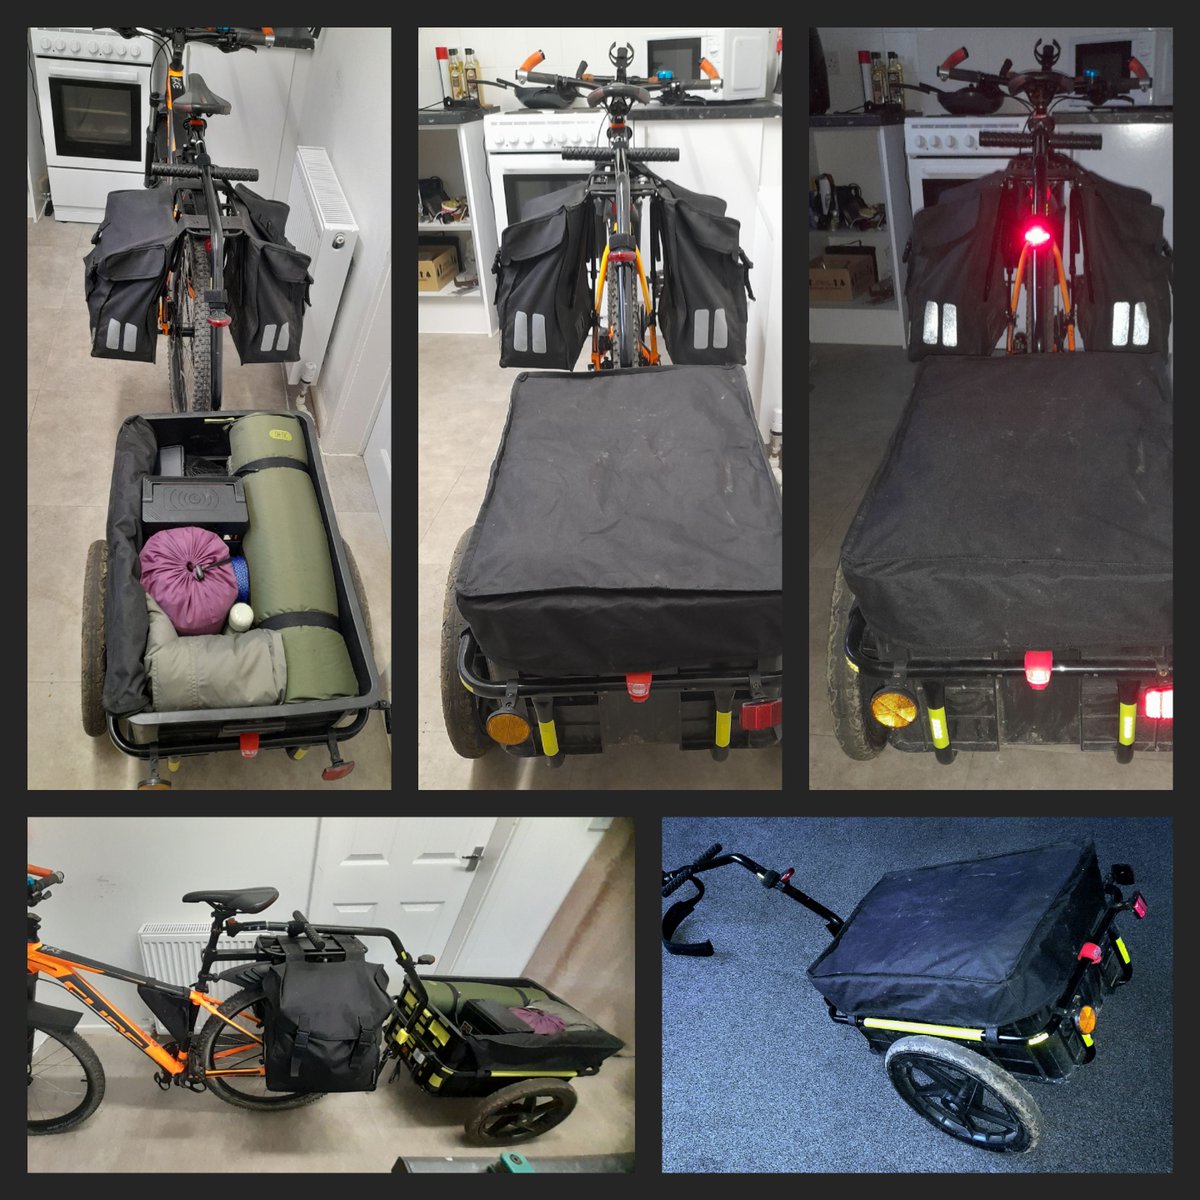 I've been on an adhd/ocd
mission and practiced organisation of the camping gear into the bike trailer. When the weather is right I'll be off on a little bikepacking trip somewhere.

🌄